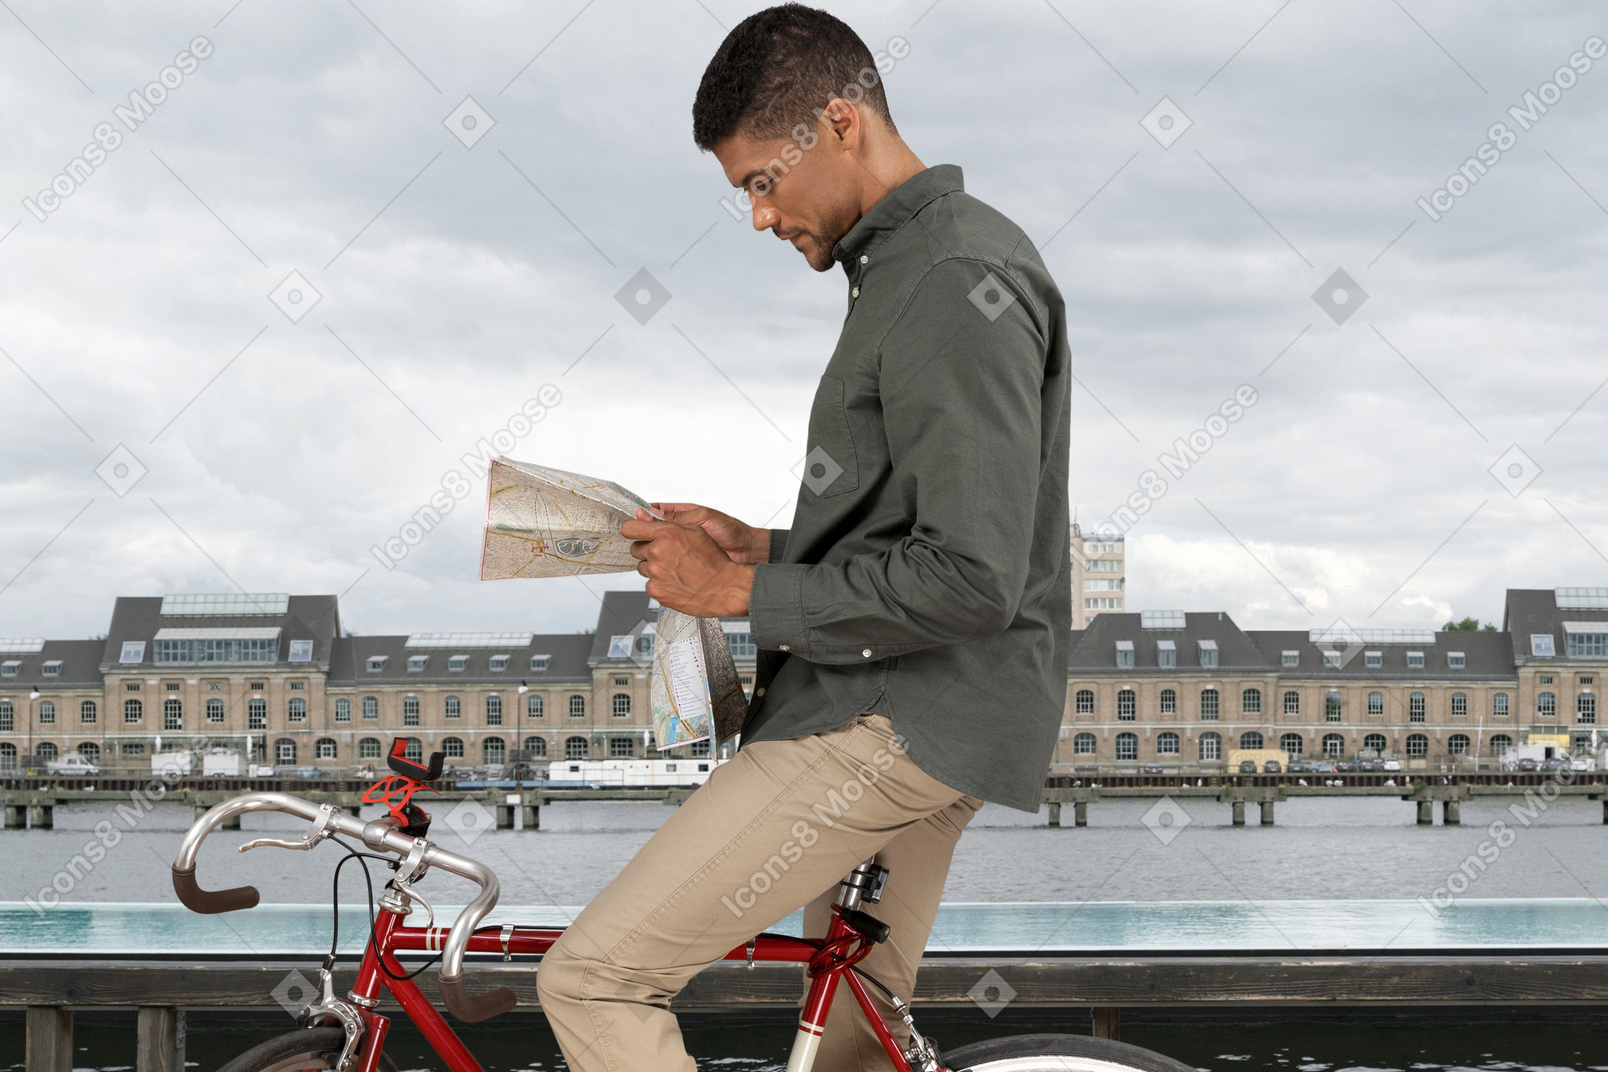 Man looking at map while standing on a bike